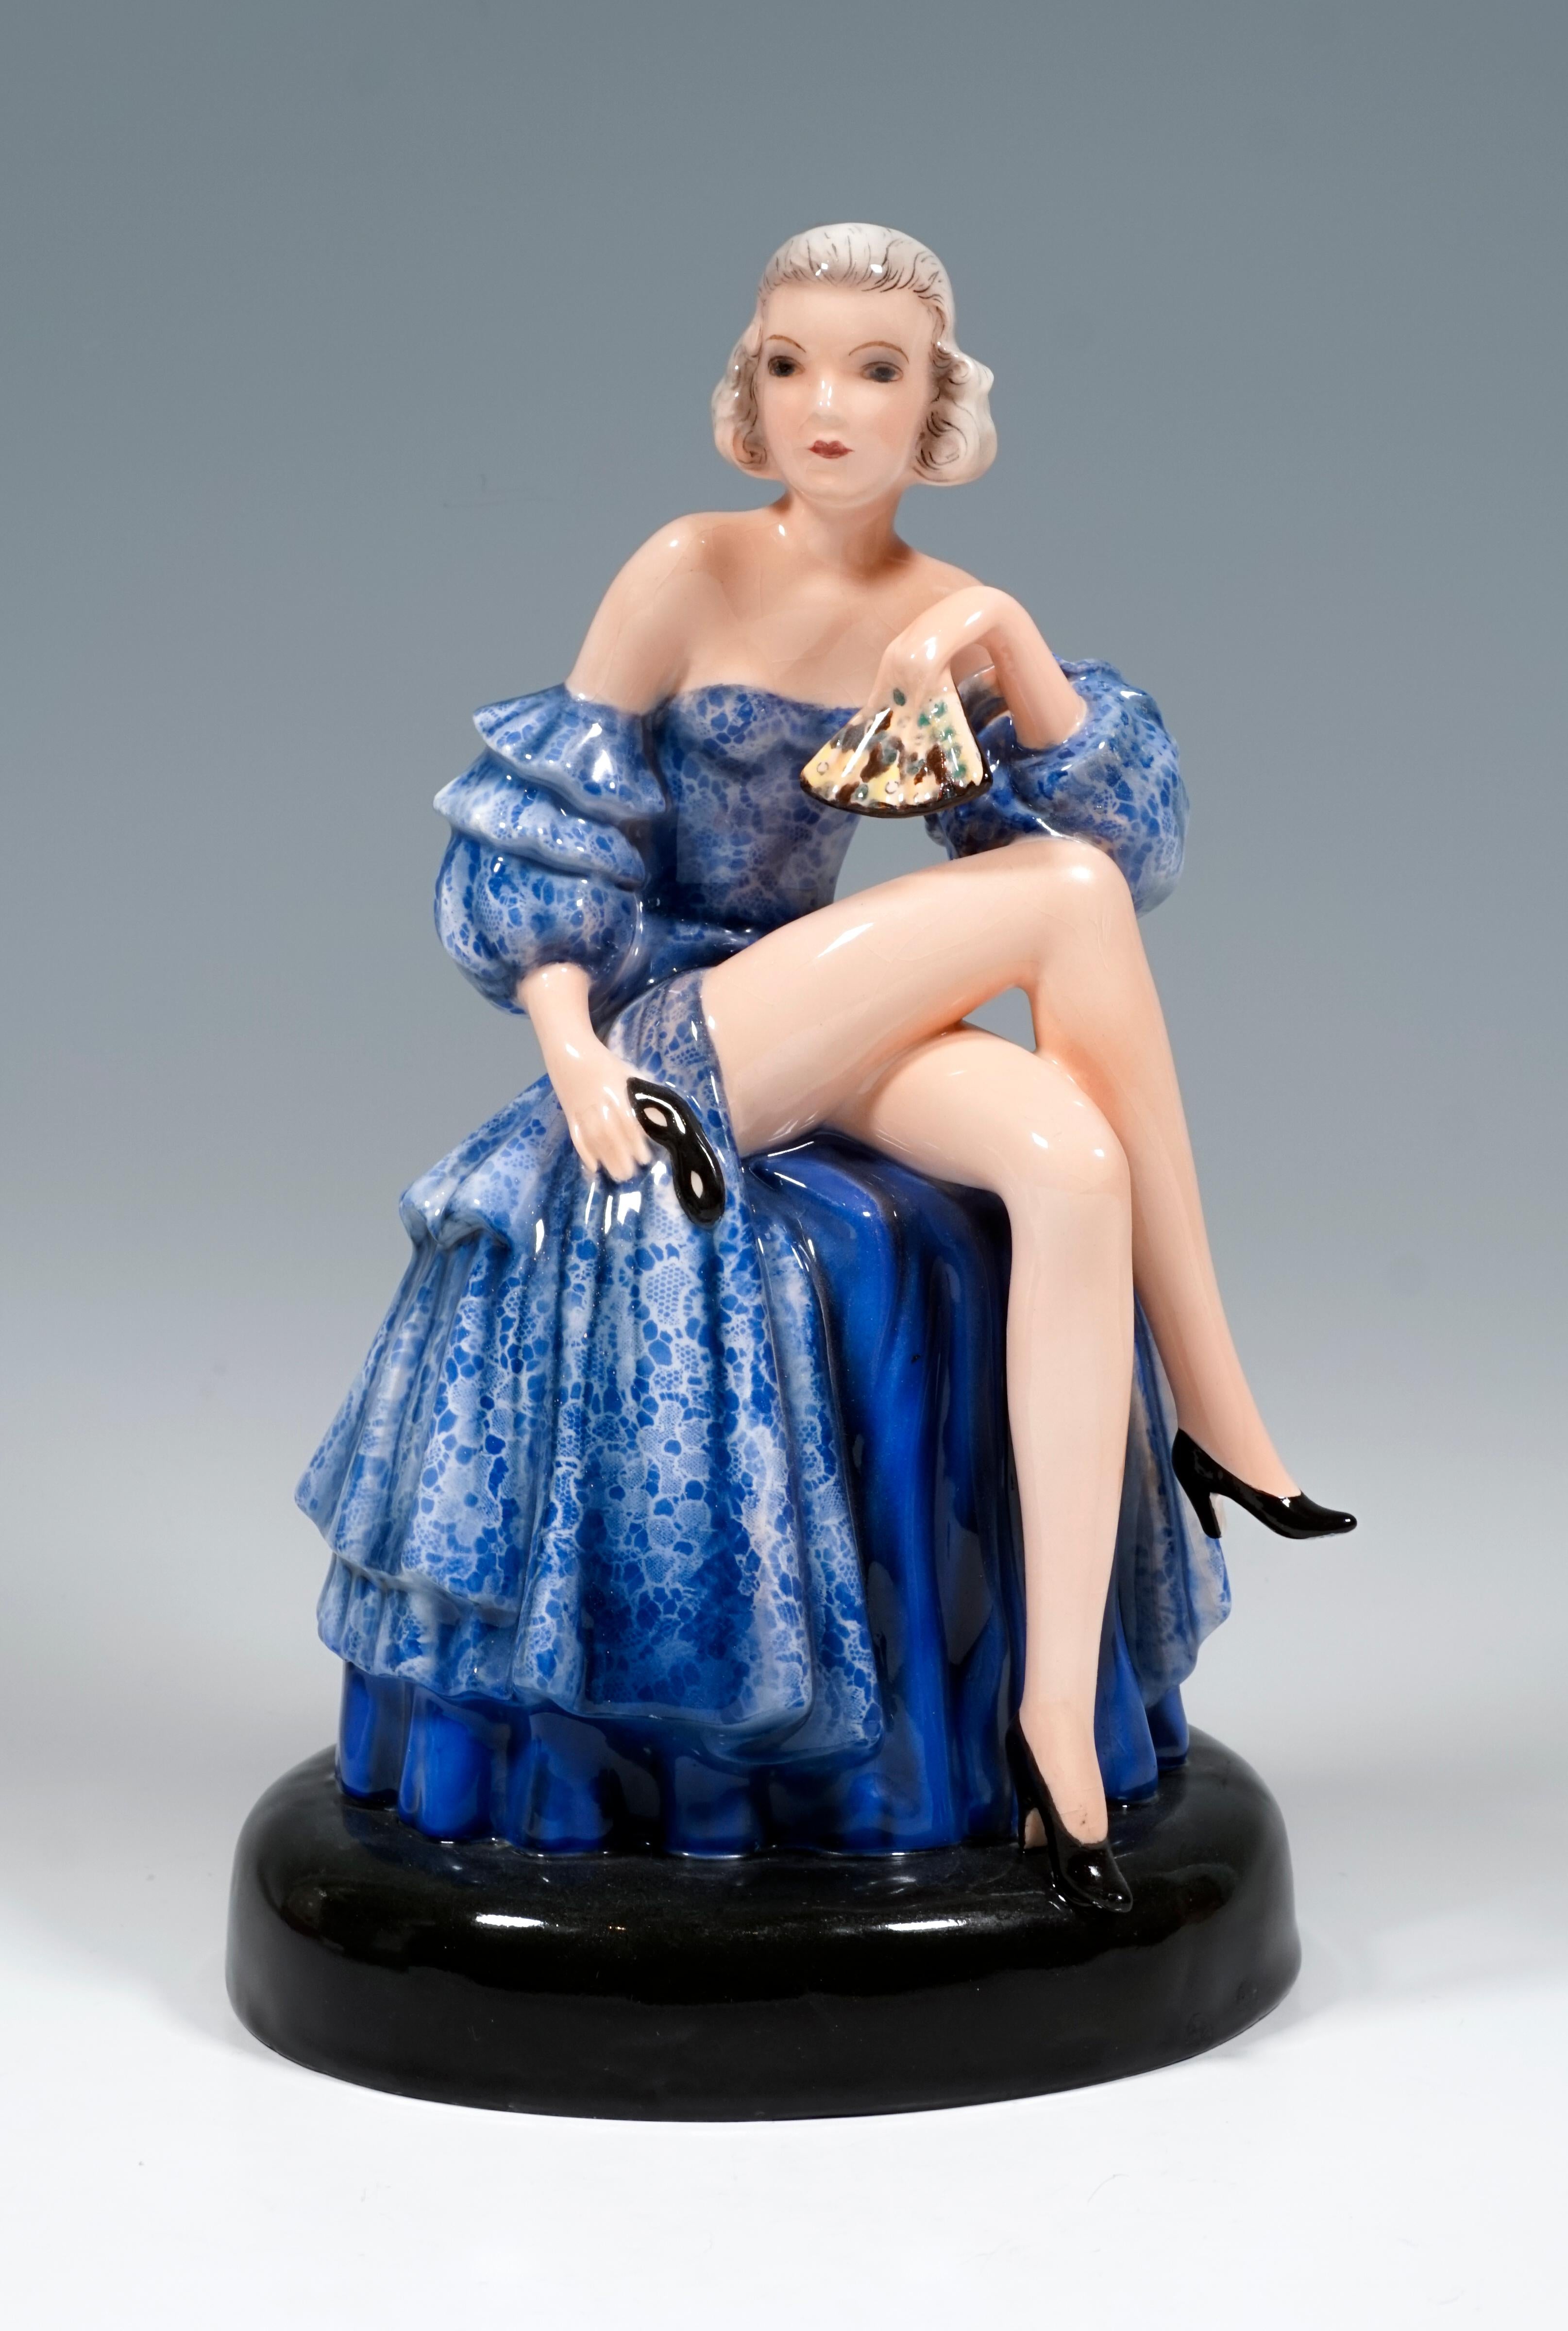 Rare Goldscheider Art Deco ceramic figurine:
Depiction of a seated dancer in a blue, strapless ball gown with lace flounces, the right leg folded over the left and the left arm on the knee, holding a ball mask and a fan in her hands.
The figure is